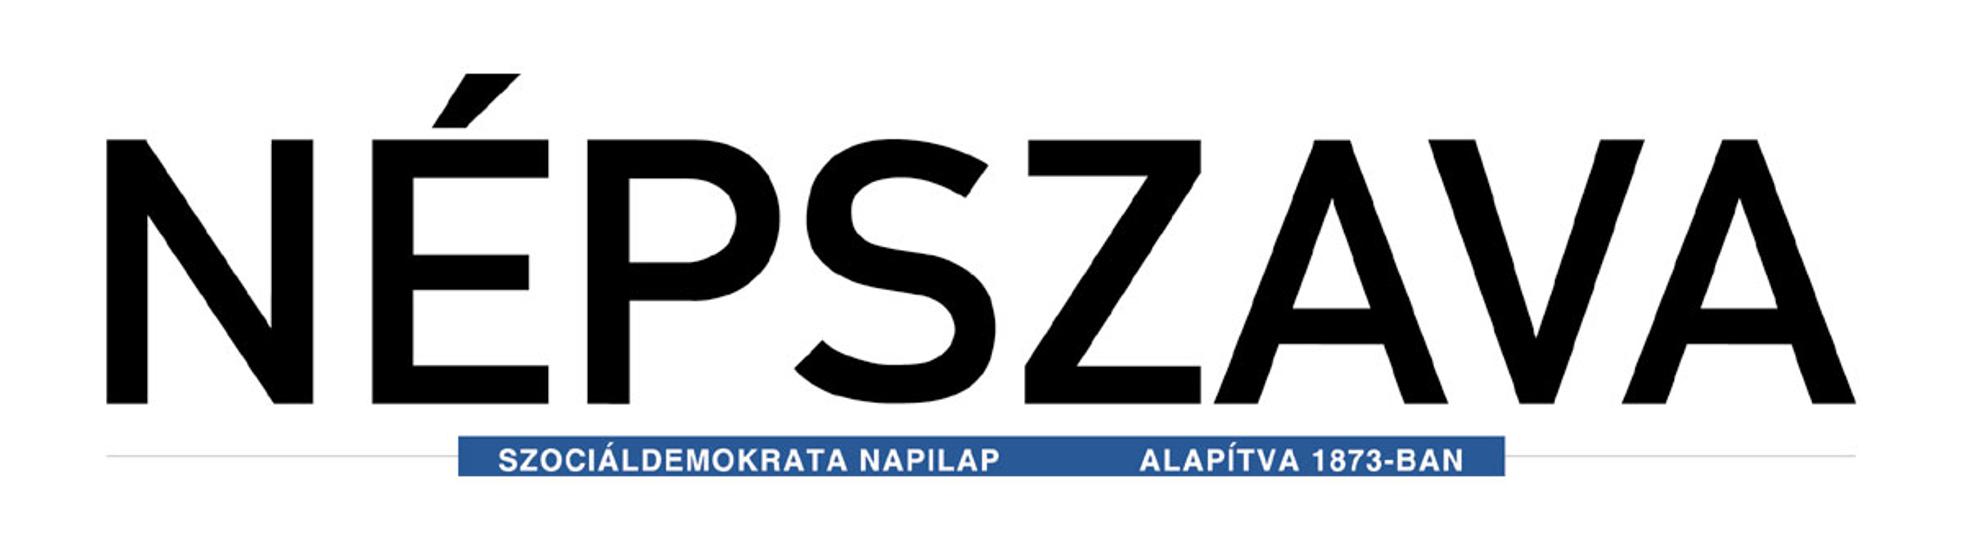 Hungarian Workers Of Népszava Want Ownership